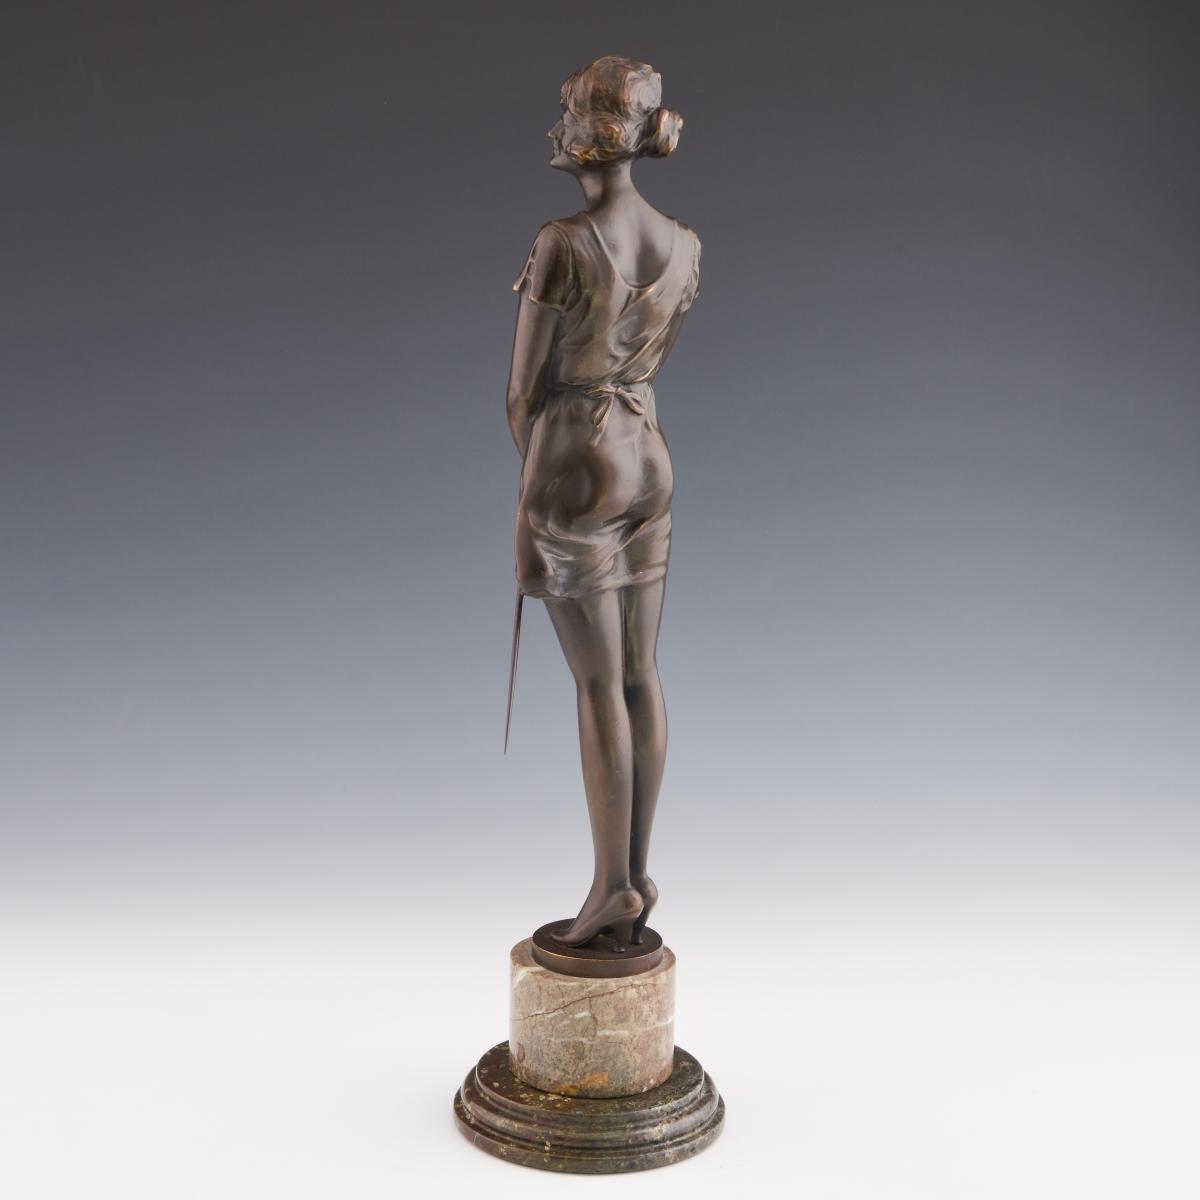 Erotic Art Deco Bronze Study Entitled 'Whip Girl' by Bruno Zach